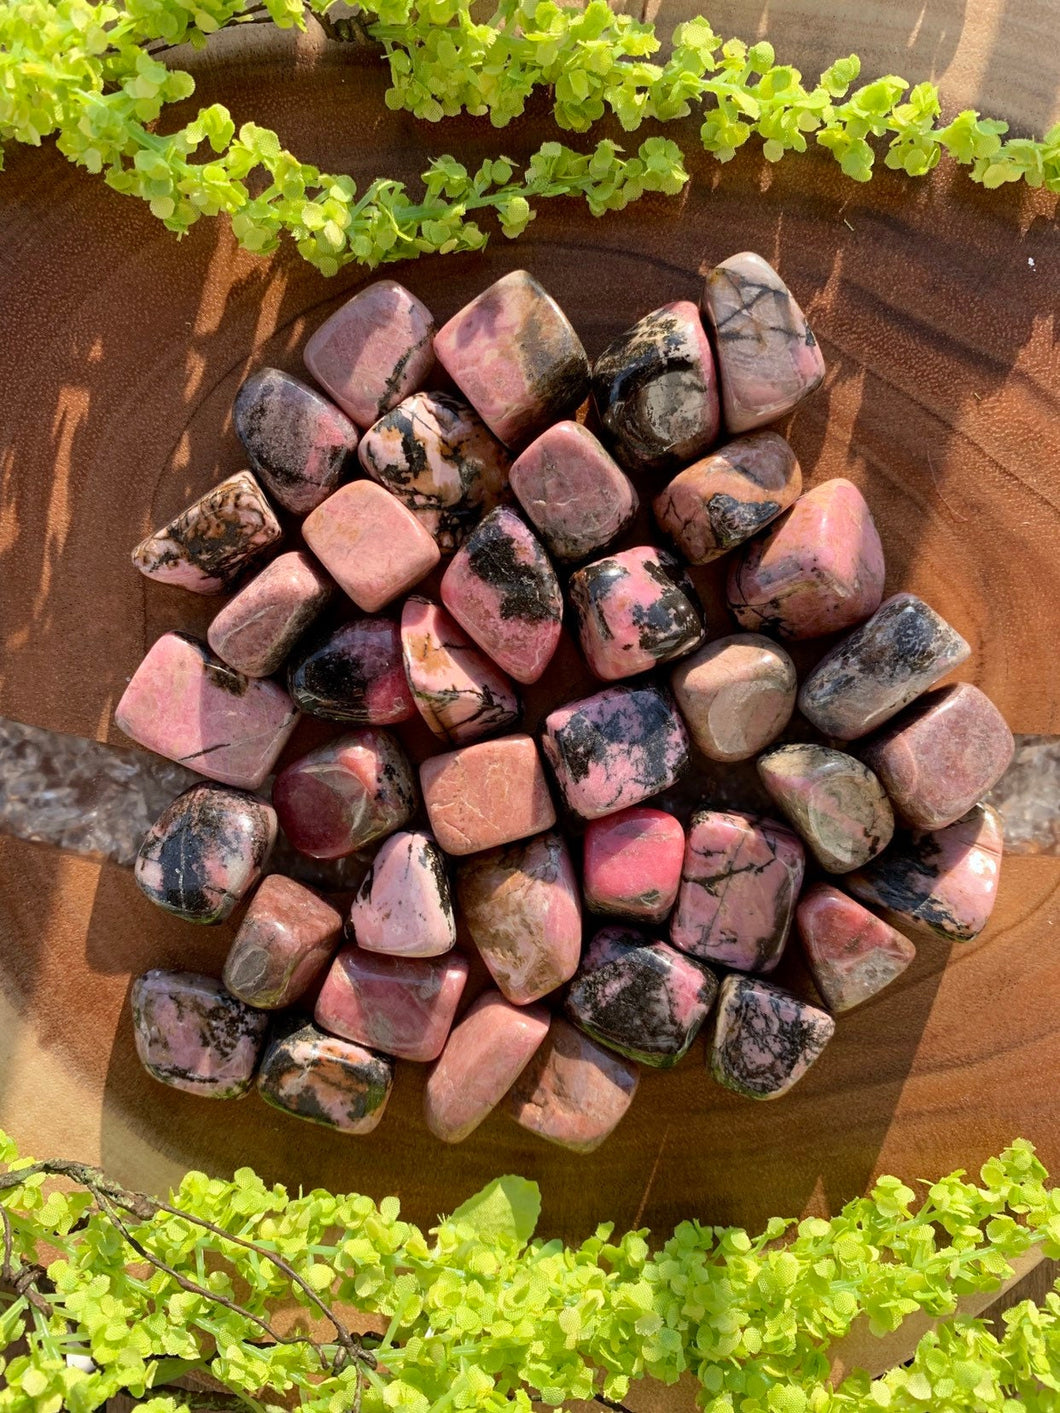 RHODONITE Crystals (Grade A Natural) Tumbled Polished Gemstone Rocks for Healing, Yoga, Meditation, Reiki, Wicca, Crafts, Jewelry Supplies